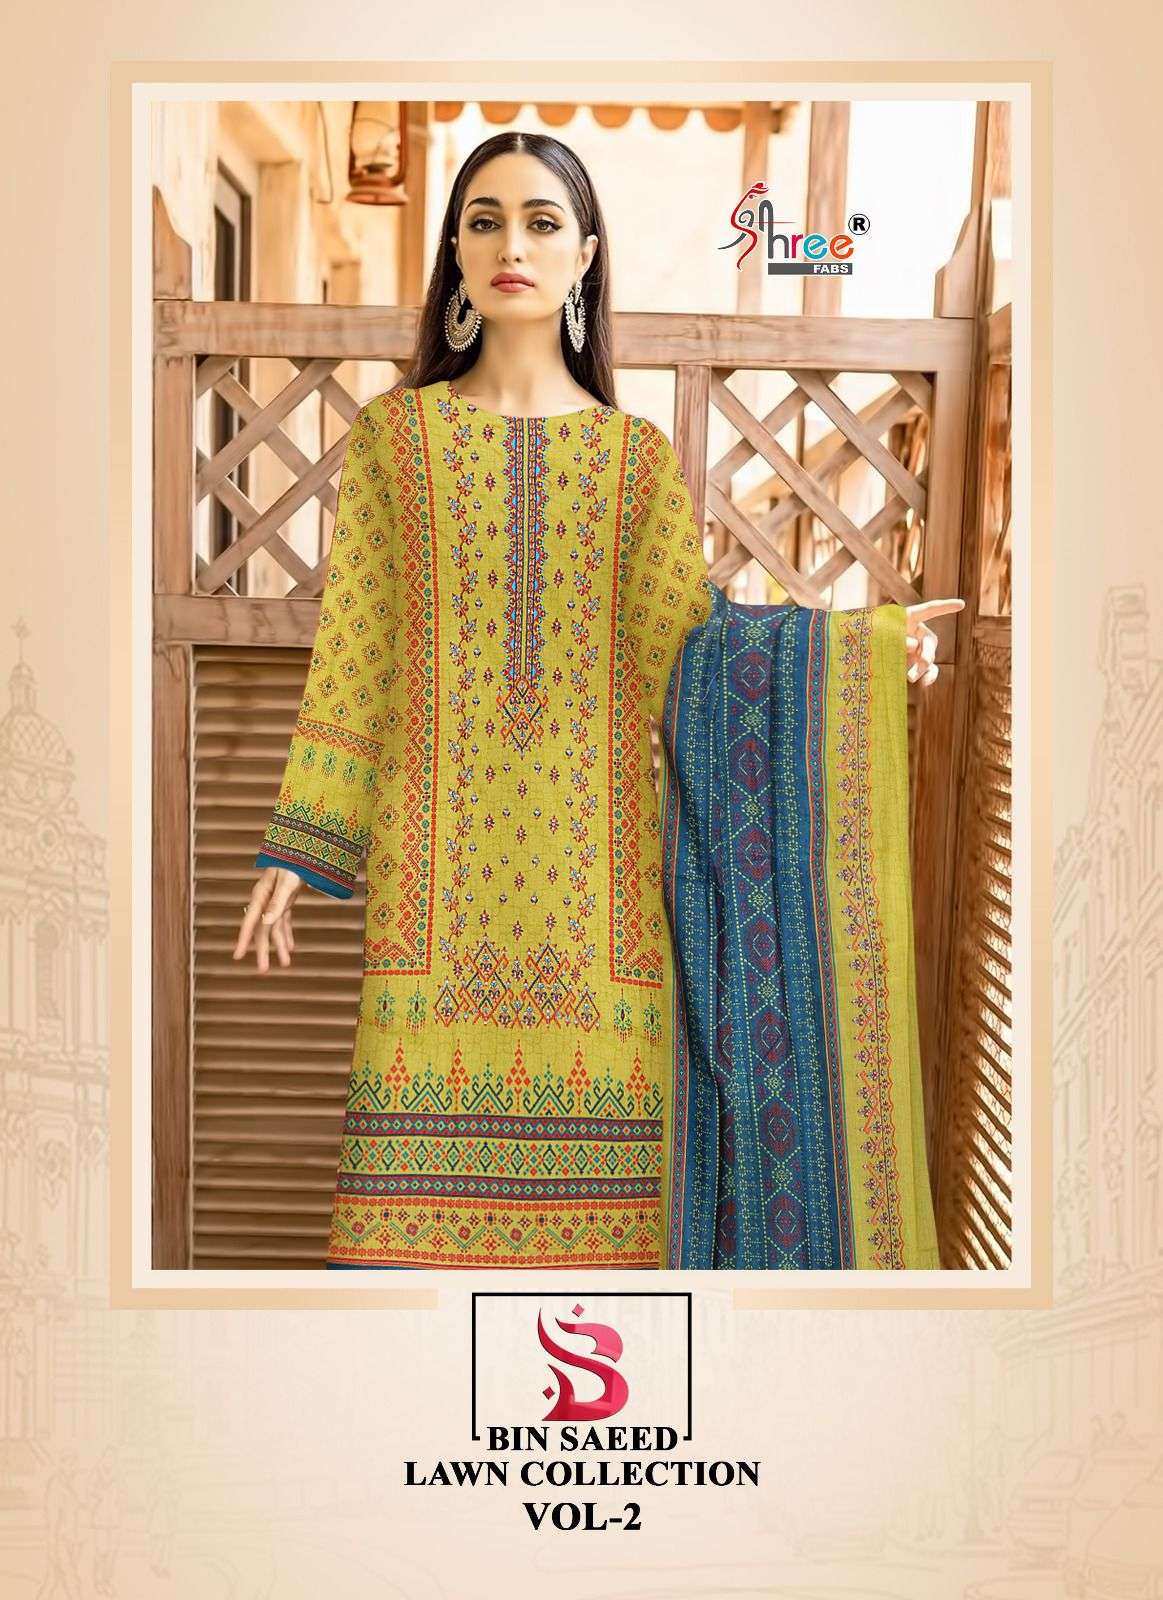 SHREE FABS BIN SAEED LAWN COLLECTION VOL-2 LAWN COTTON EMBROIDERY SUITS